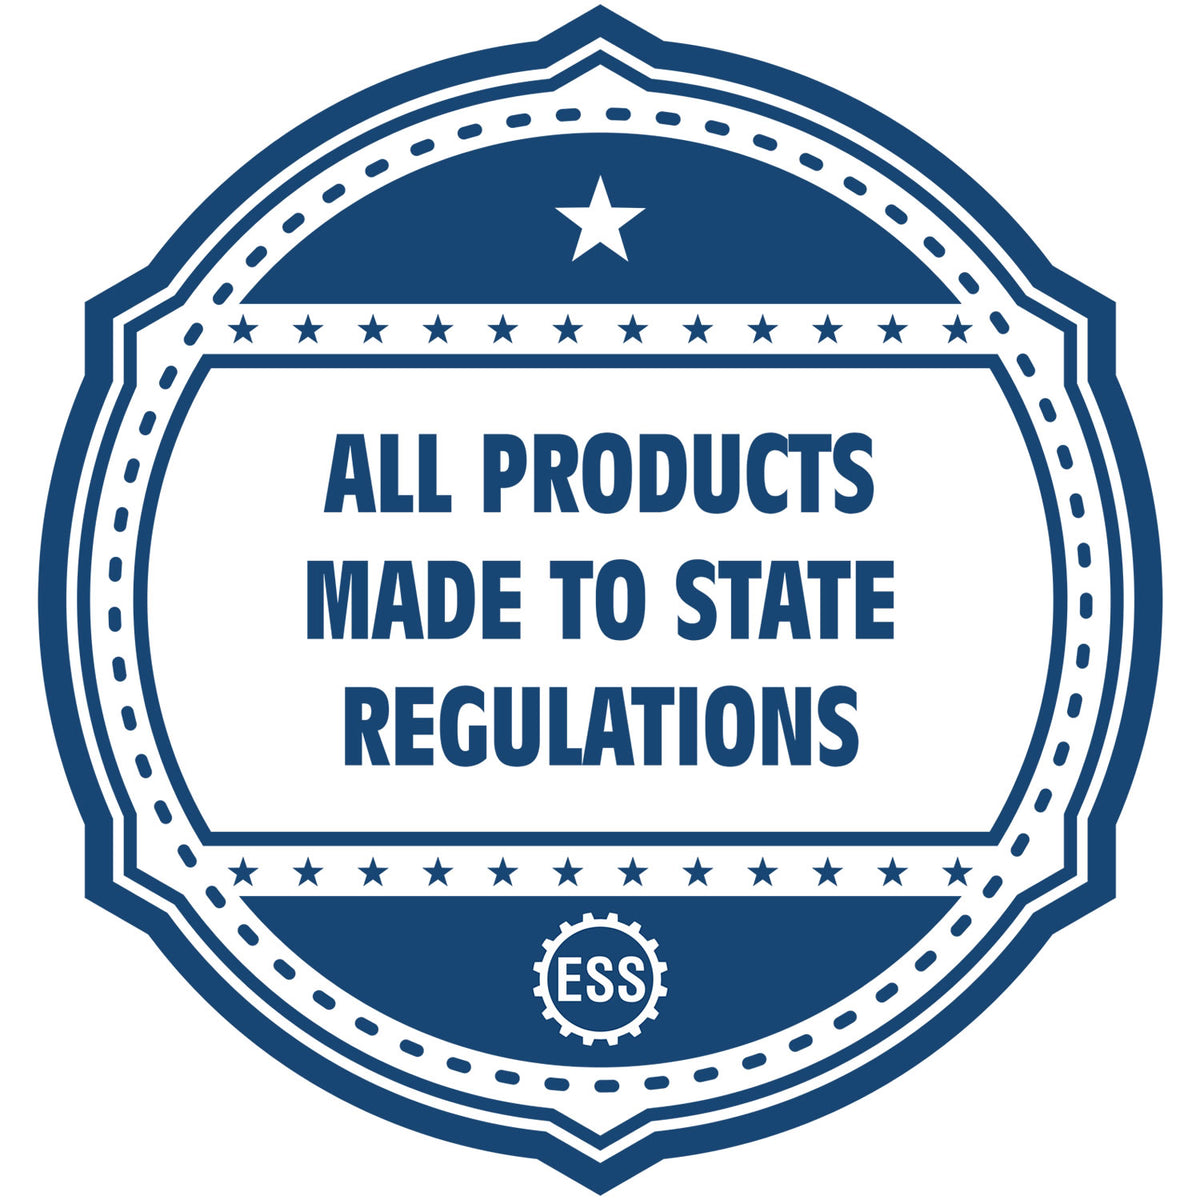 A blue icon or badge for the Gift New Mexico Engineer Seal showing that this product is made in compliance with state regulations.